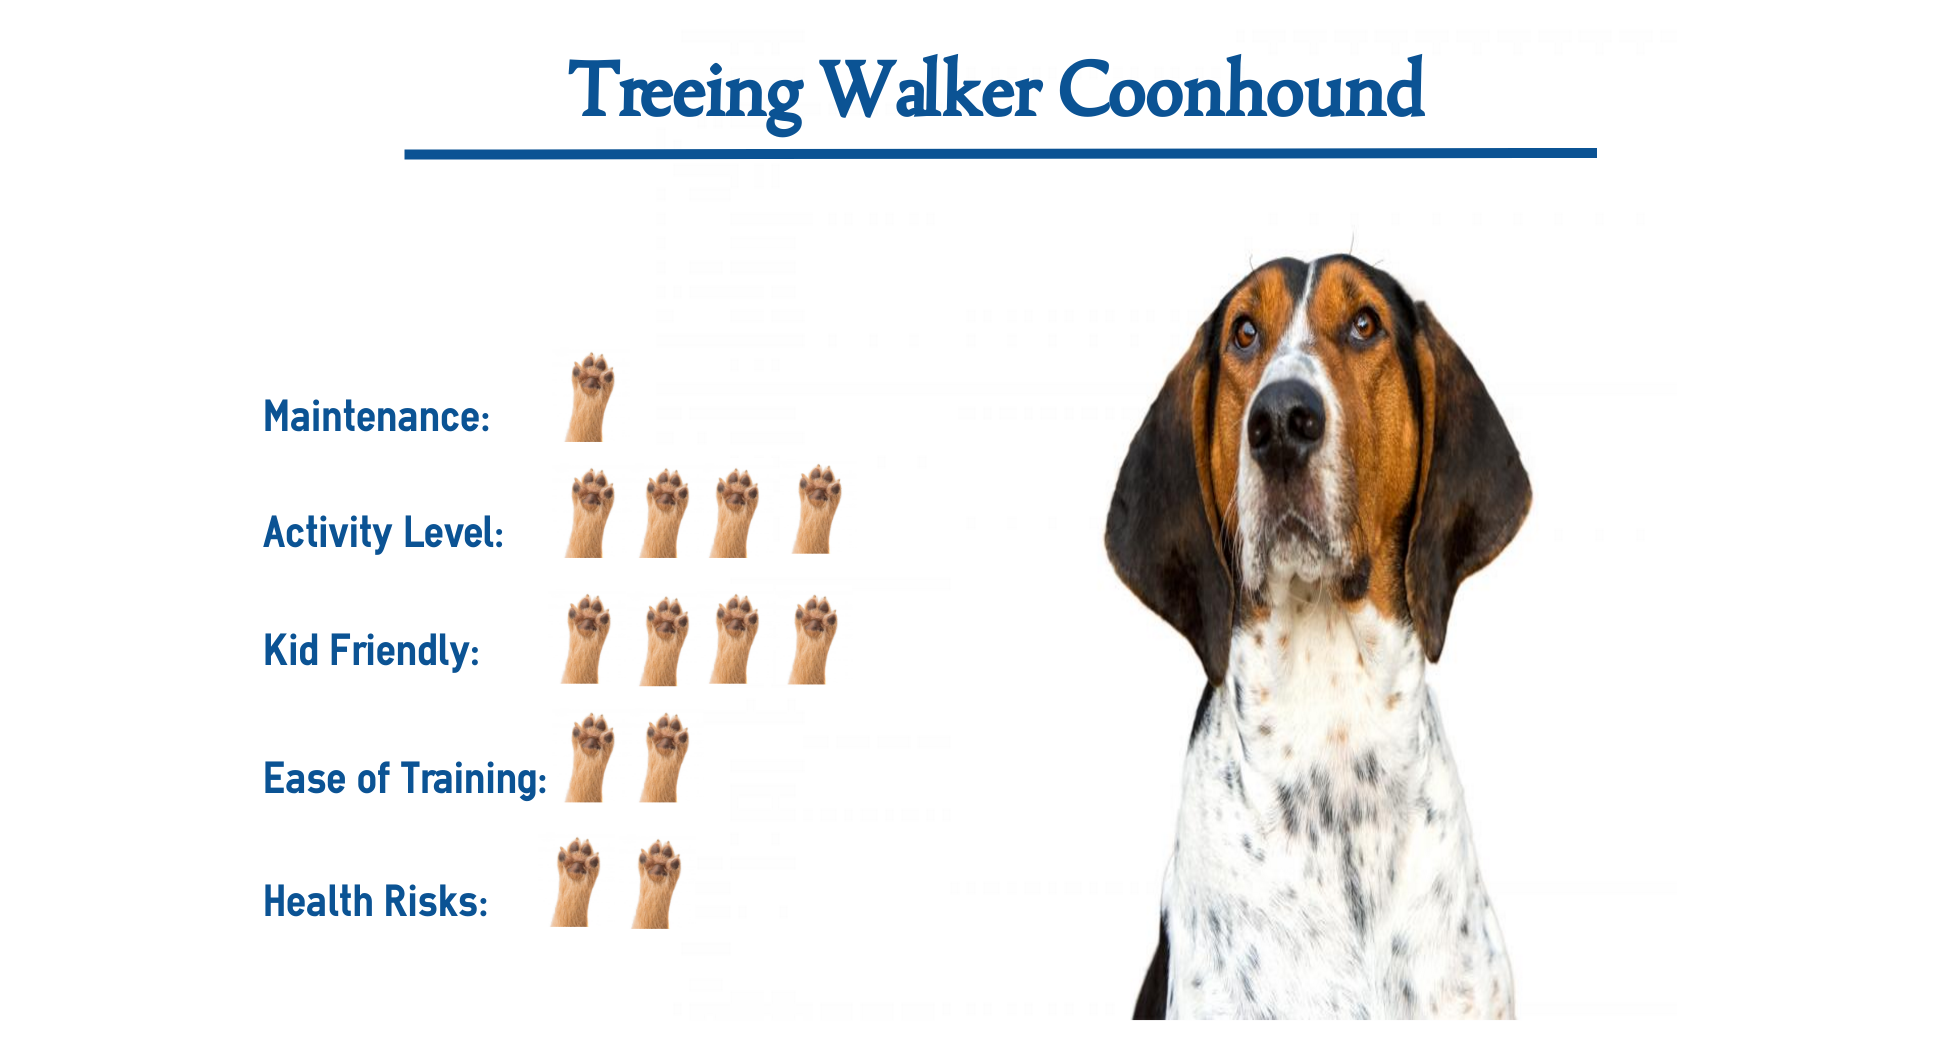 Treeing Walker Coonhound Dog Breed Everything You Need To Know At A Glance